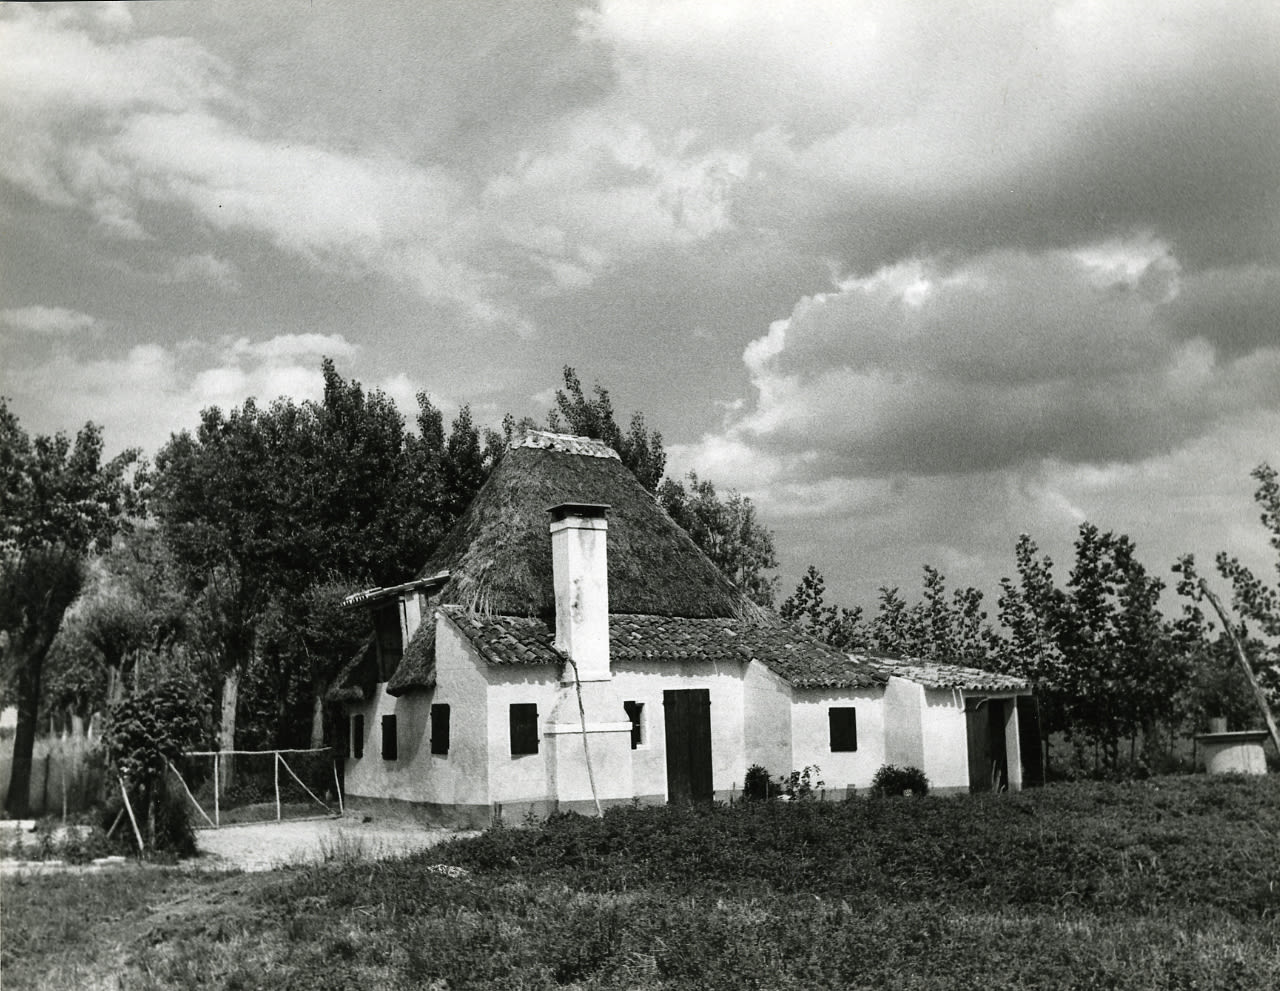 black and white photograph, a white cottage surrounded by trees